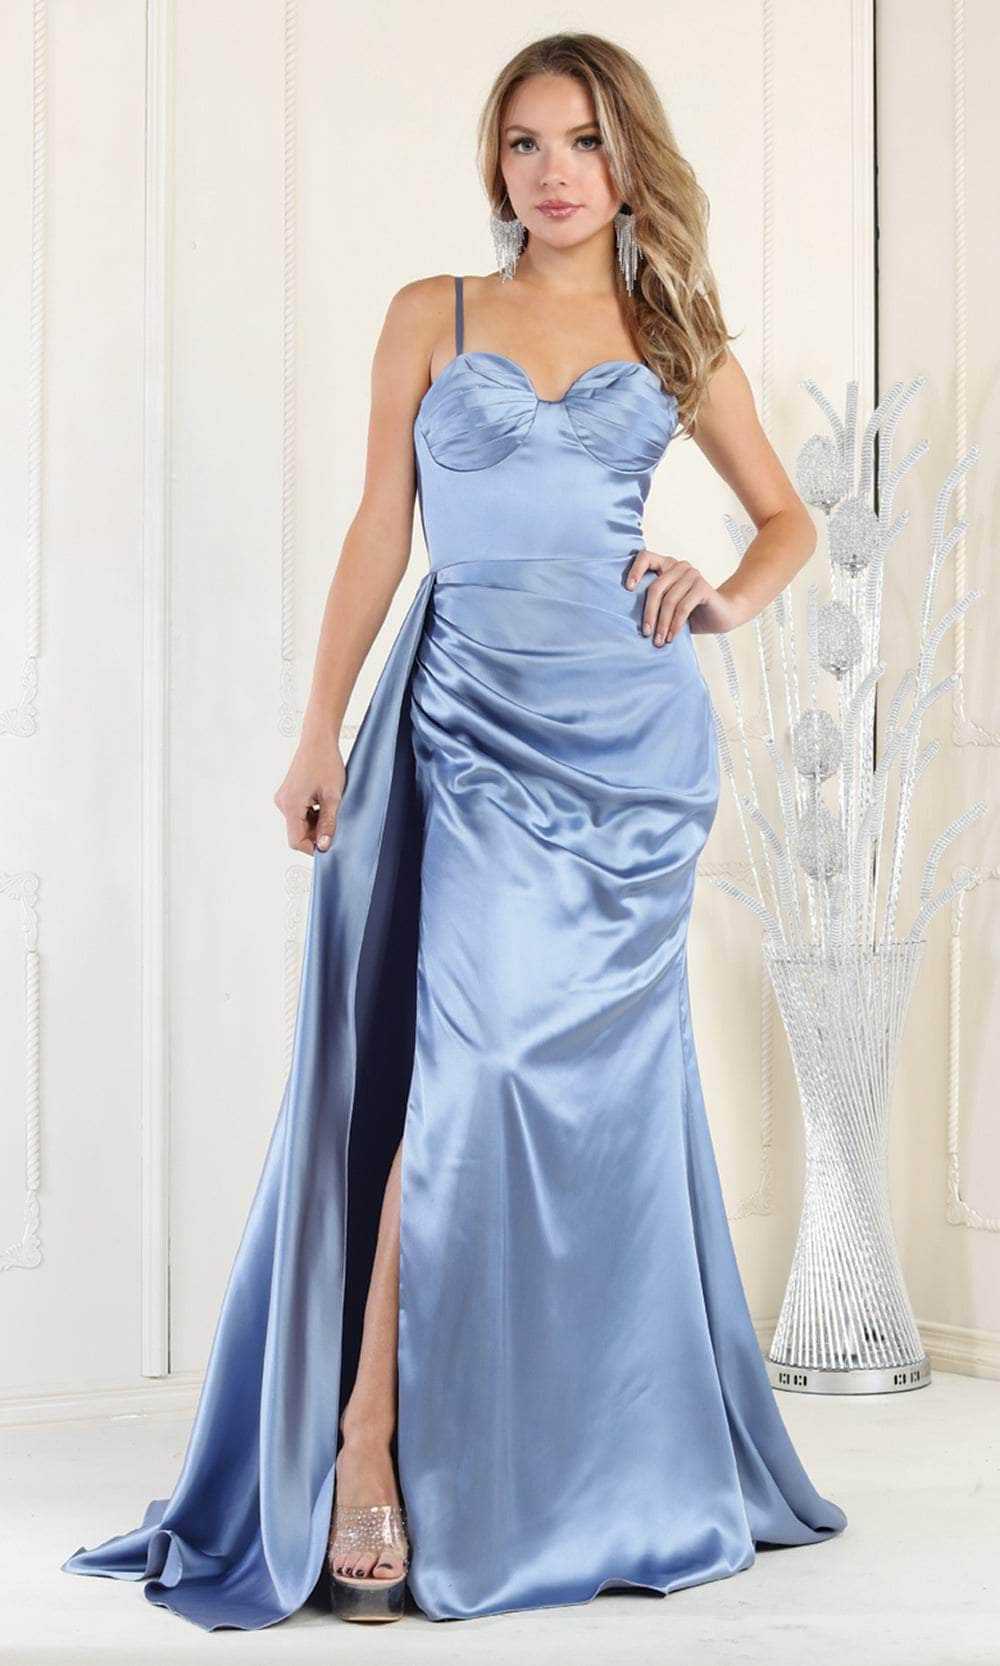 May Queen, May Queen RQ7960 - Sweetheart Sleeveless Prom Dress